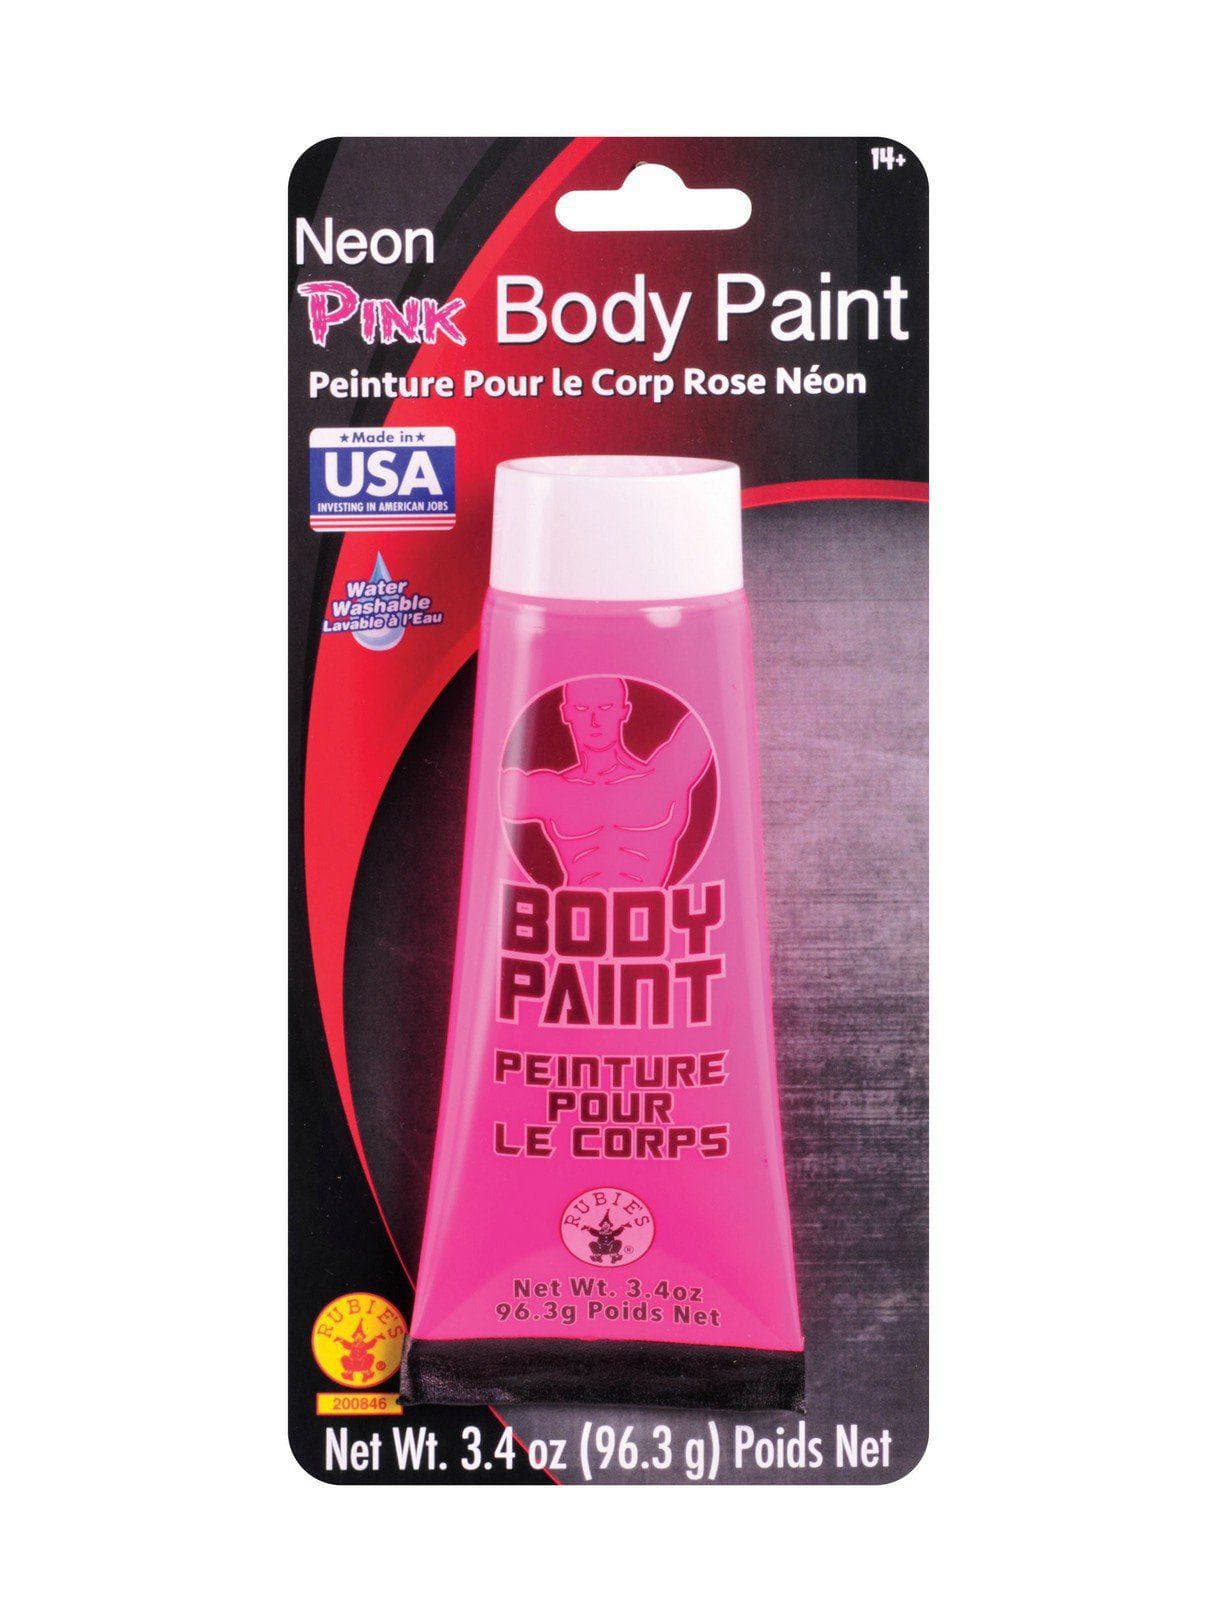 Body Paint - Neon Pink - costumes.com